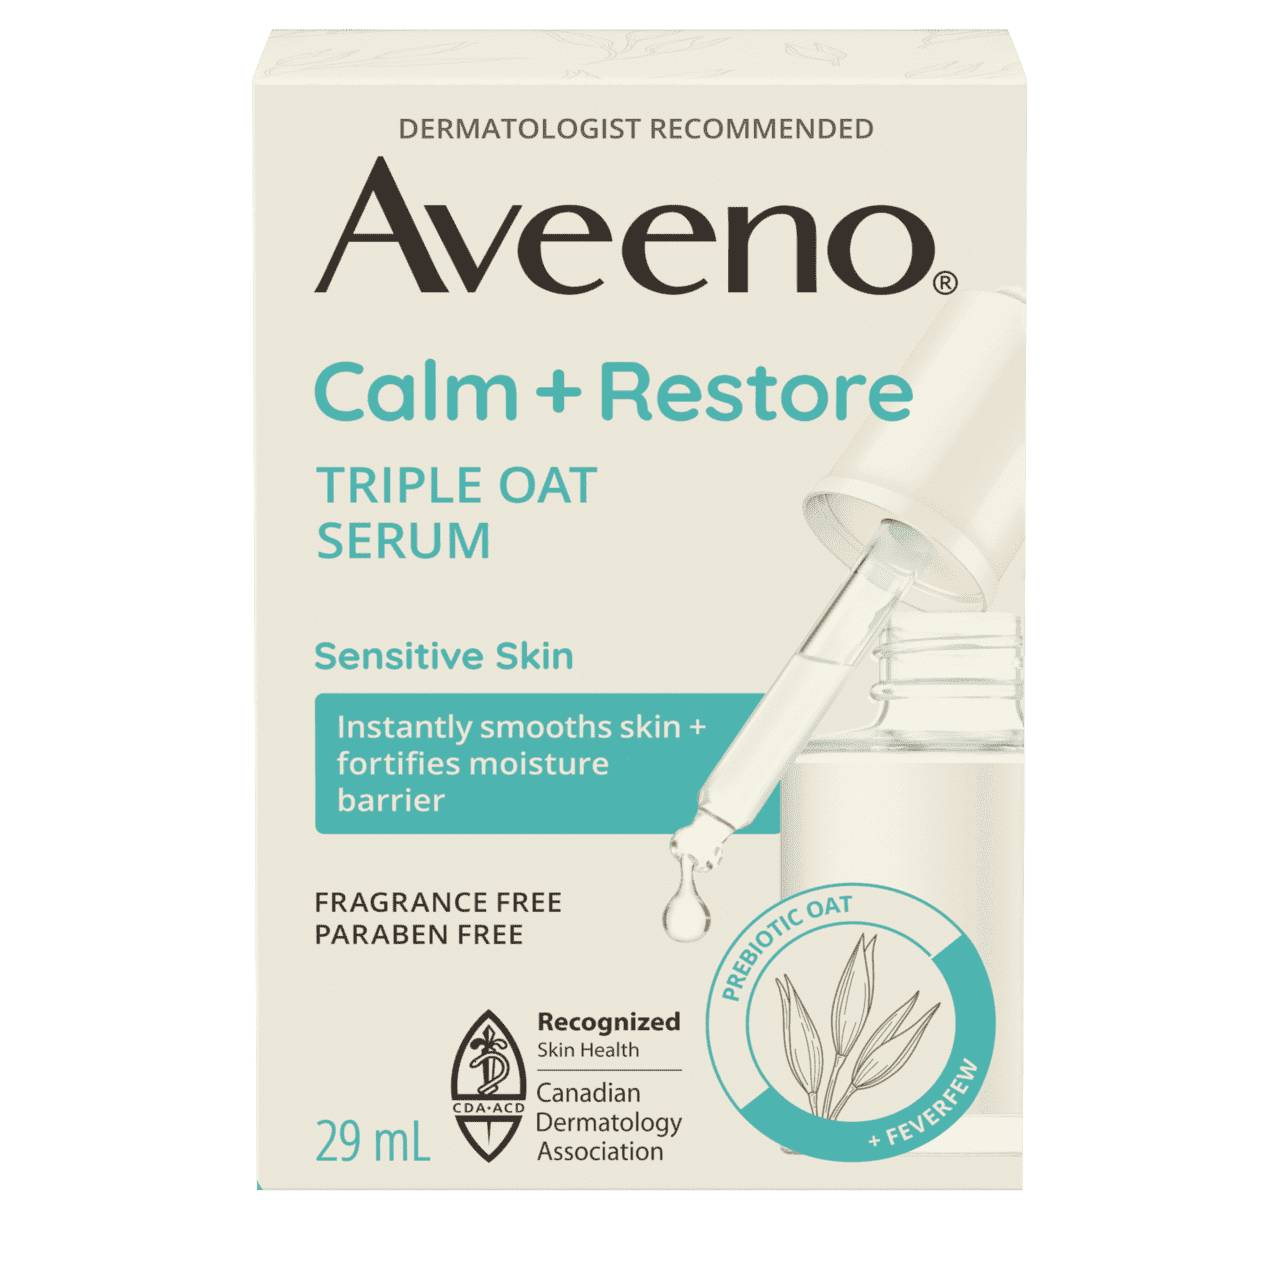 English side of packaging for AVEENO® Calm + Restore Triple Oat Serum